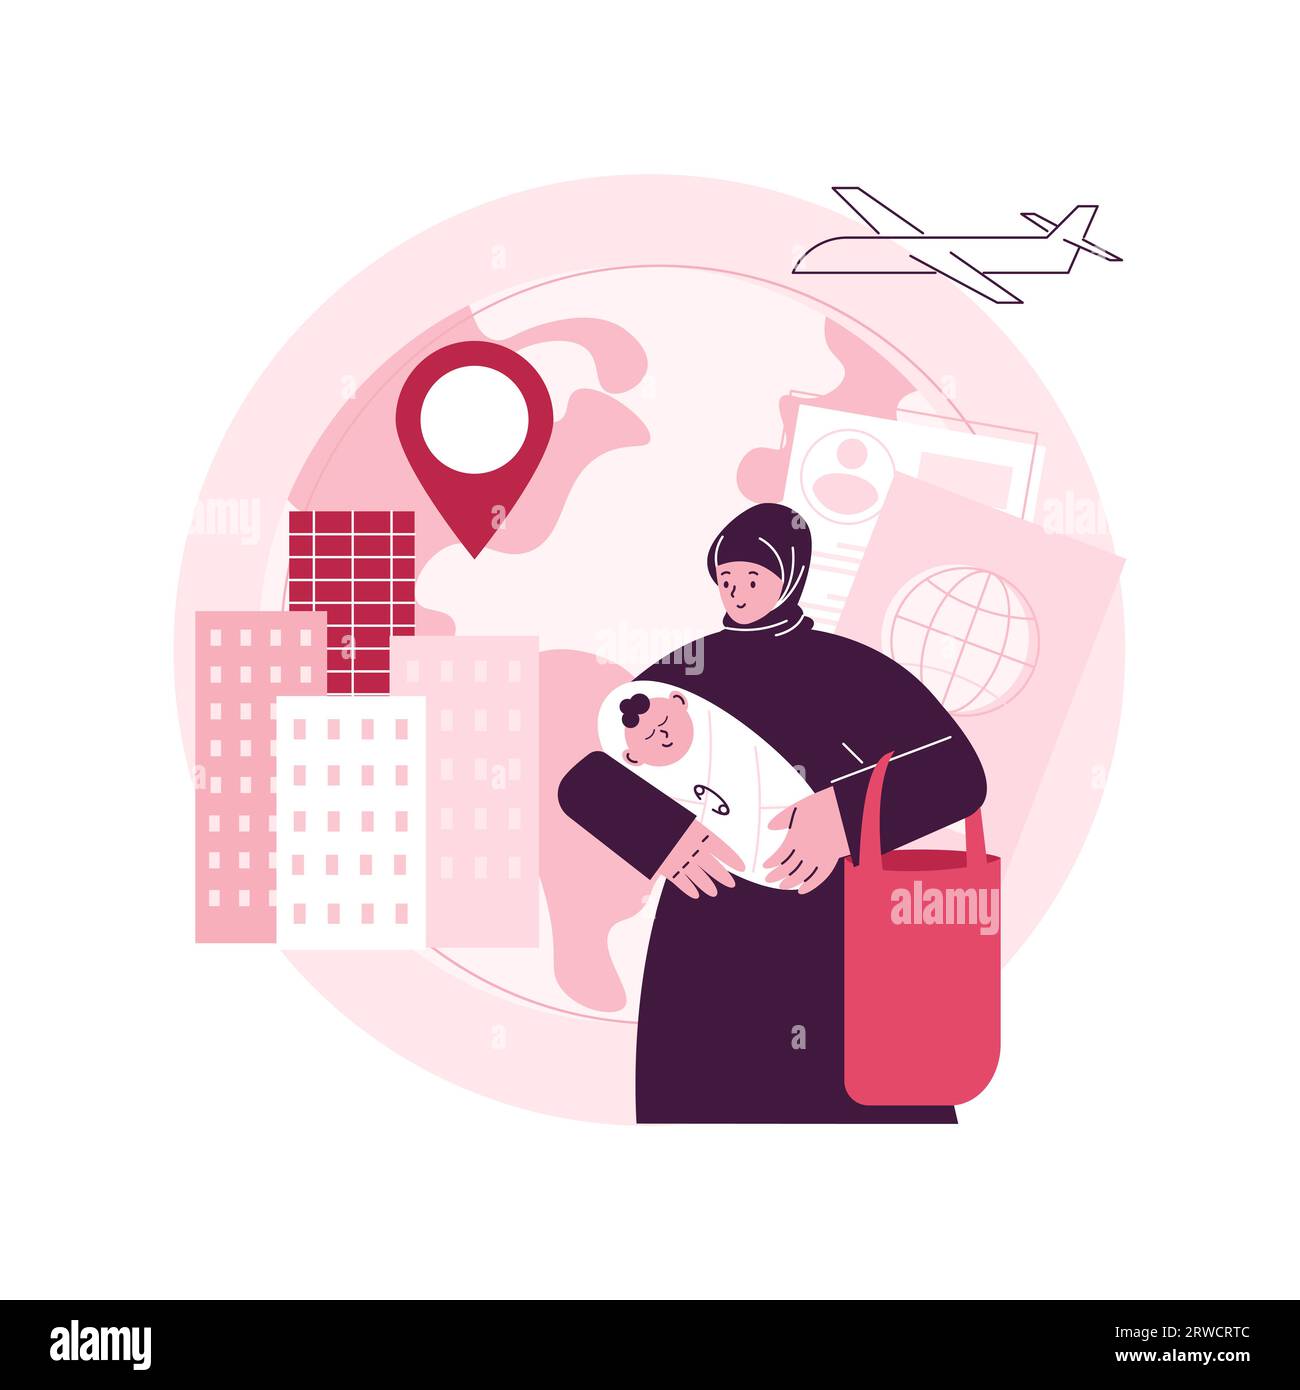 Female migrant abstract concept vector illustration. Female migrant worker, international marriage, philippine indian muslim woman, passport and documents, house cleaner, refugee abstract metaphor. Stock Vector